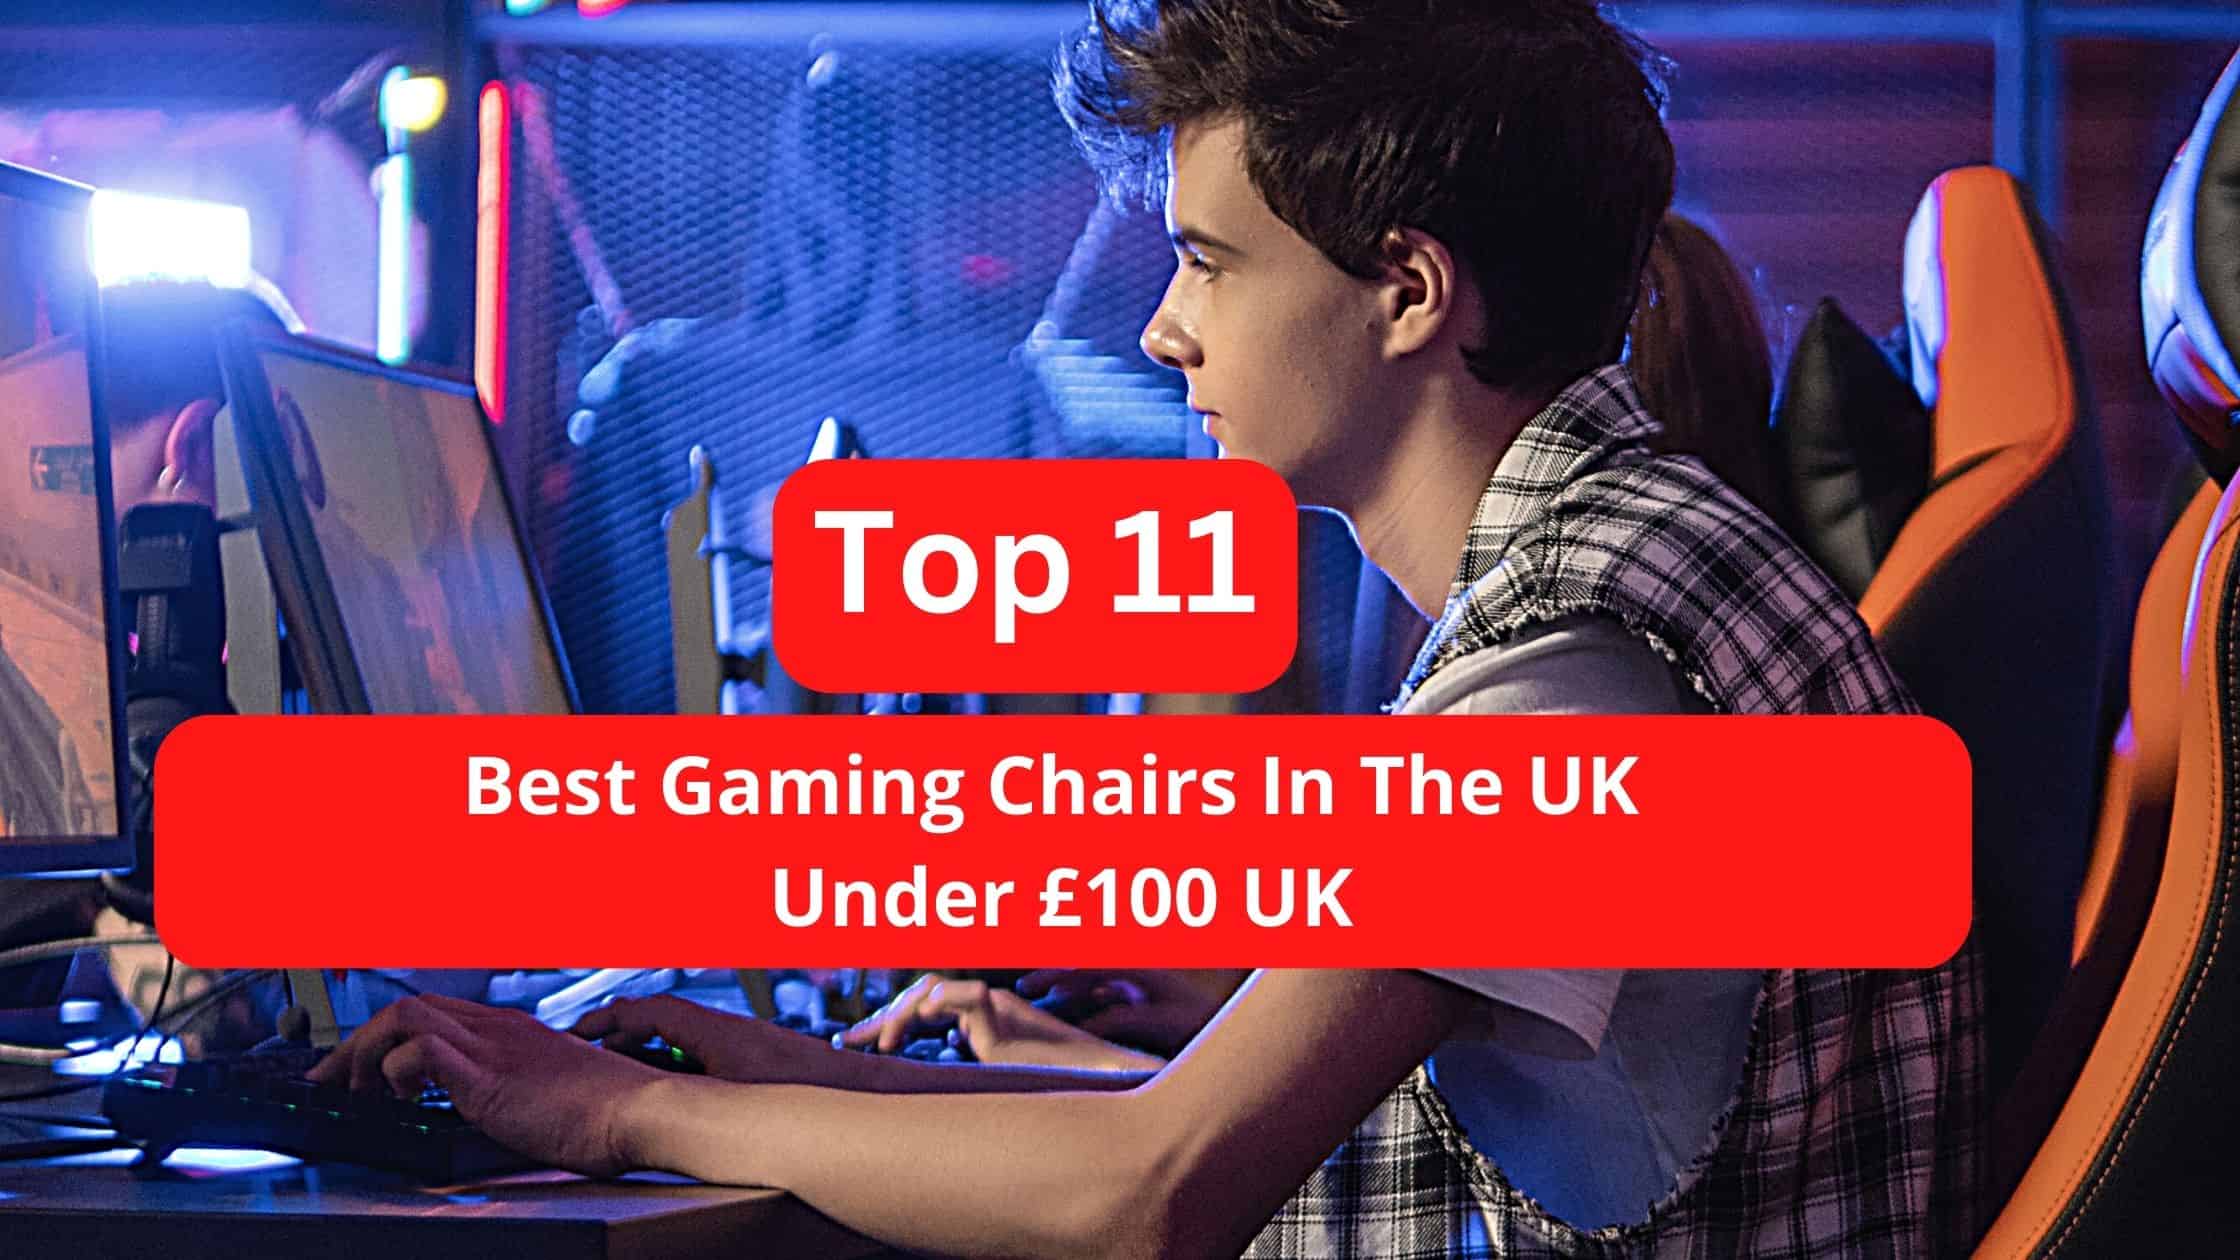 Top best gaming chairs in the uk under £100